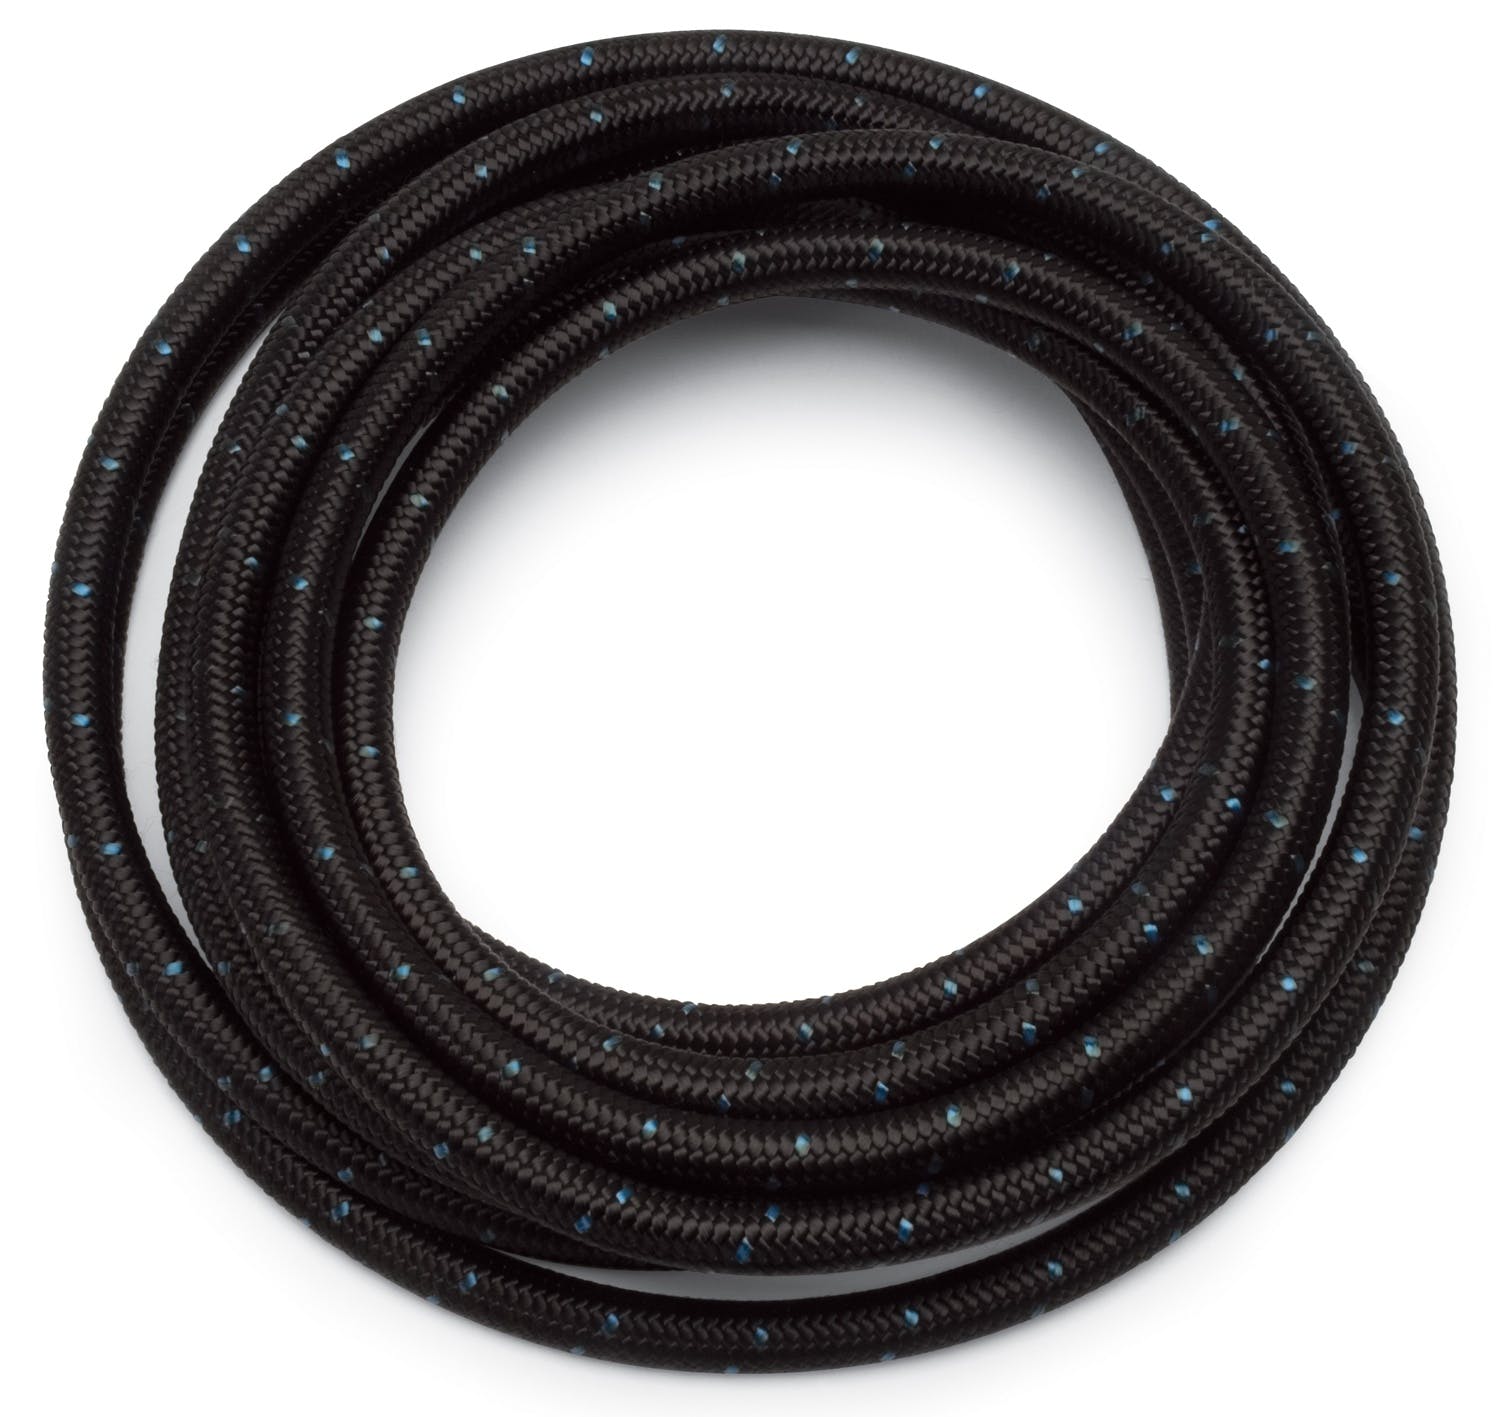 Russell 632063 #6 Black Cloth hose  Blue Tracer  6ft length